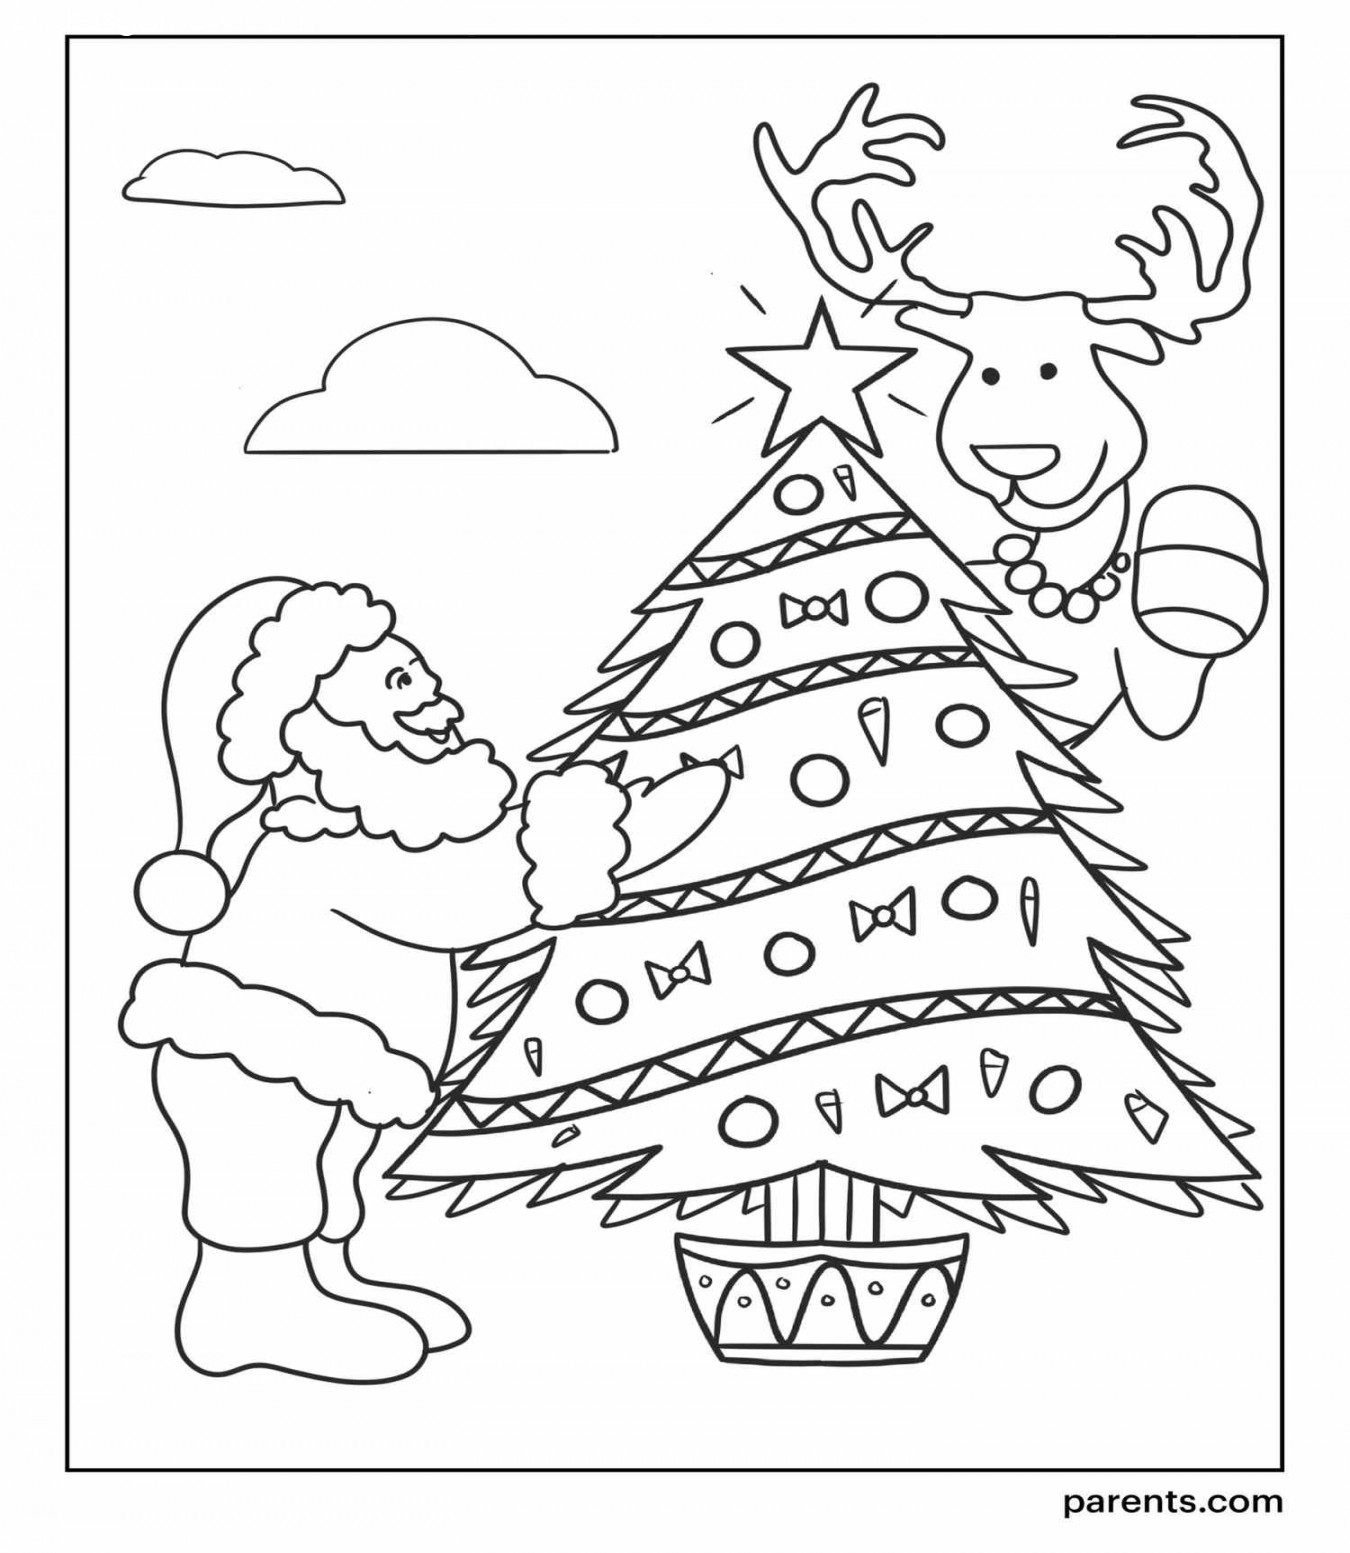 Christmas Tree Coloring Pages Kids Will Love